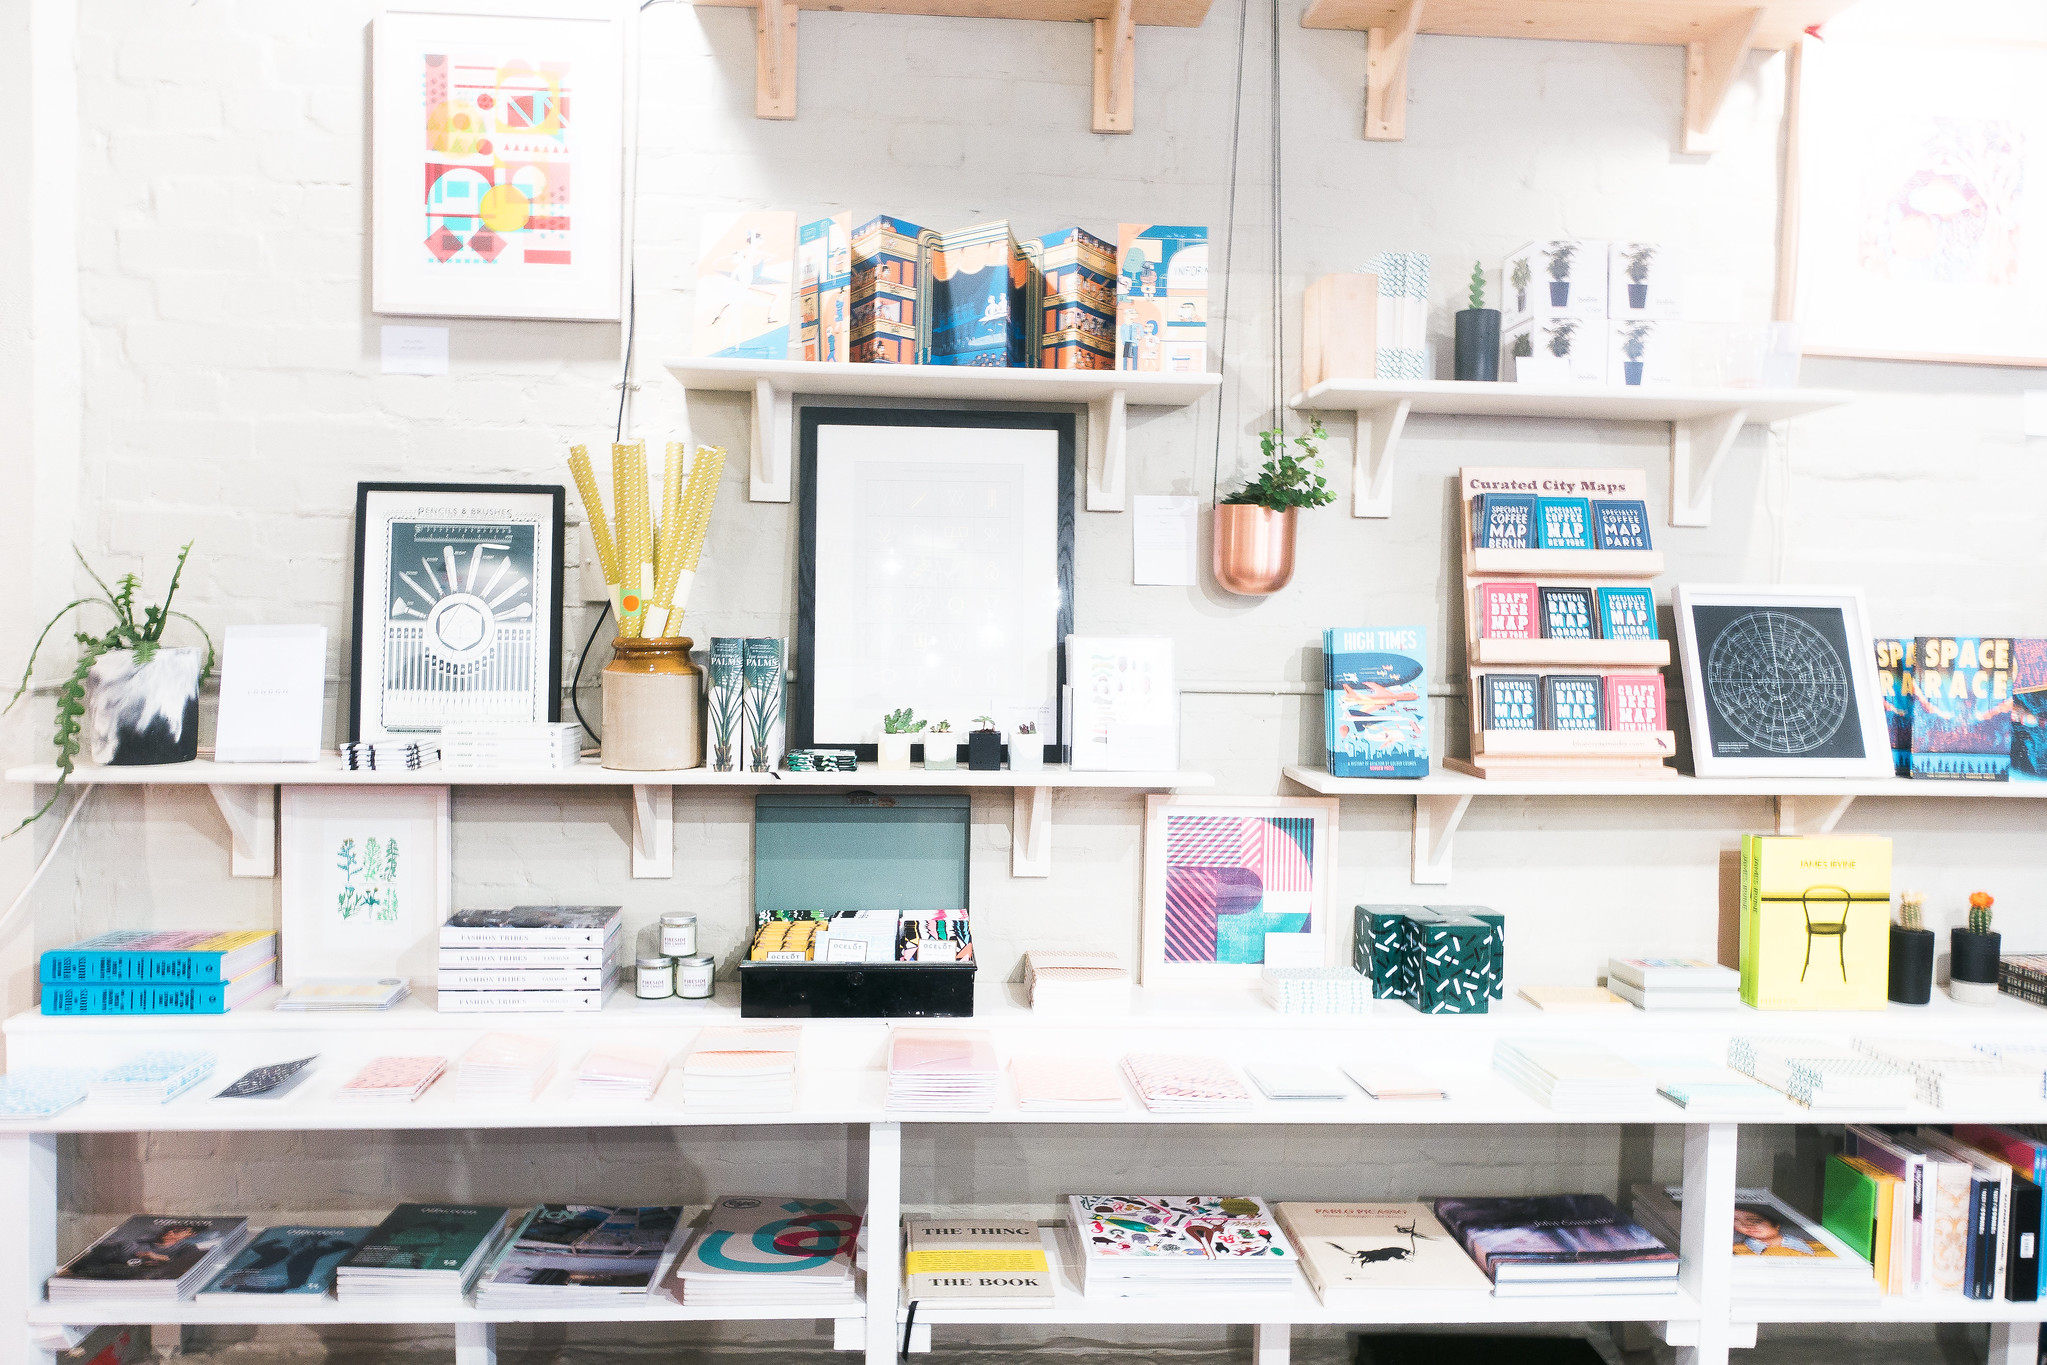 The Top 9 Independent Shops in Shoreditch, London